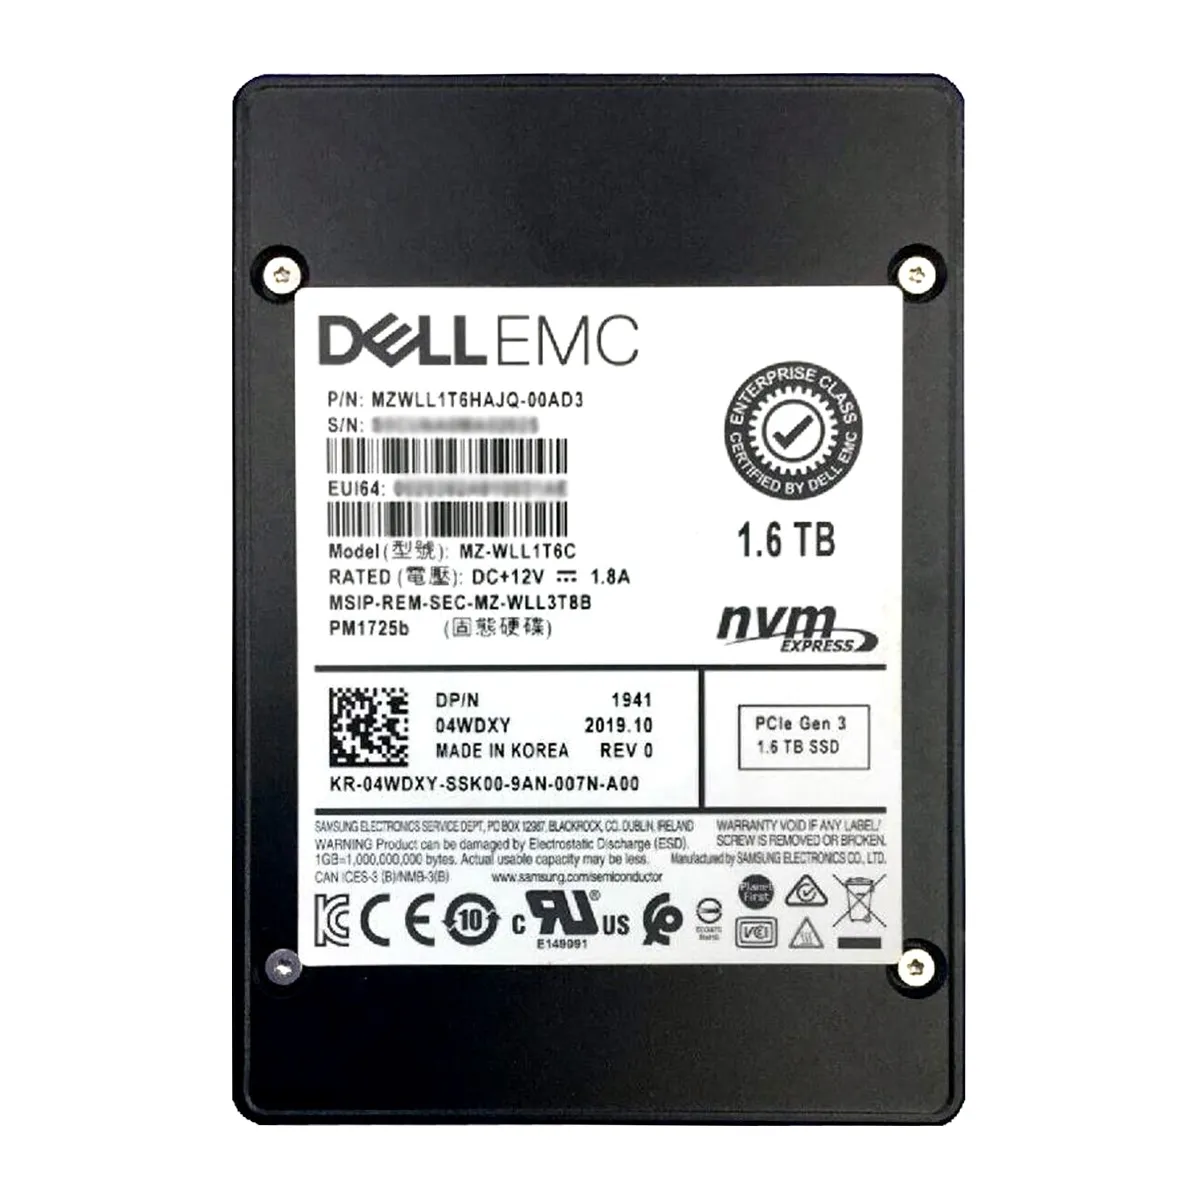 Dell (4WDXY) - 1.6TB Mixed Use (SFF 2.5in) U.2 NVMe SSD